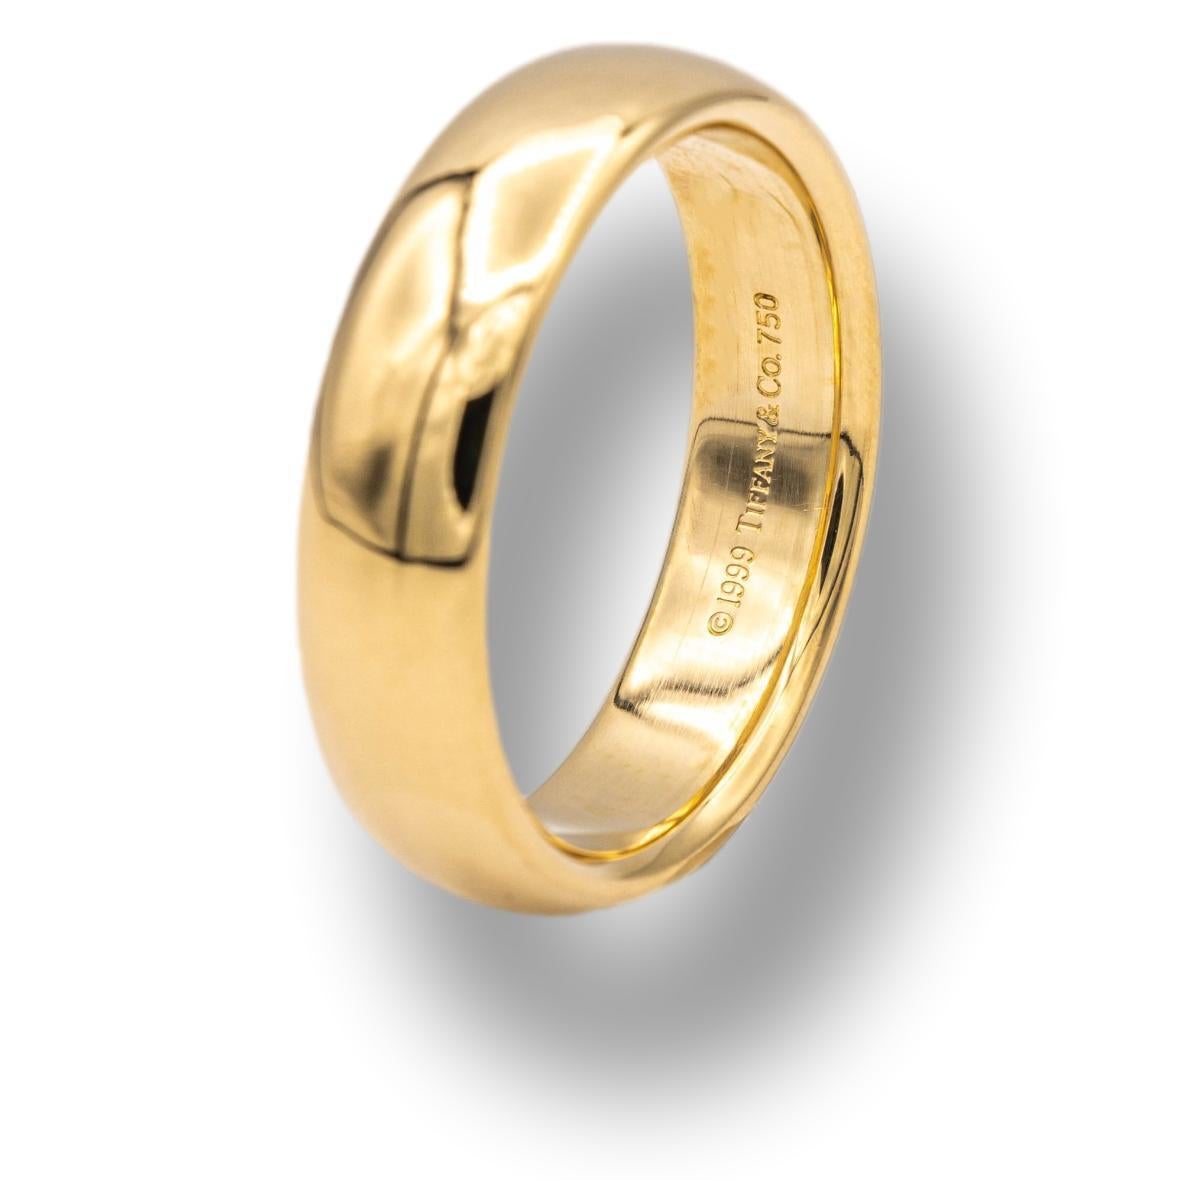 Tiffany & Co. 6mm Mens Wedding band ring finely crafted in 18 karat yellow gold. Comfort fit.

Stamp: © 1999 Tiffany & Co. 750
Size: 9.5
Width: 6mm
Weight:10.4 grams
Retail: $1,650

Comes with Tiffany black inner box and outer blue box.
